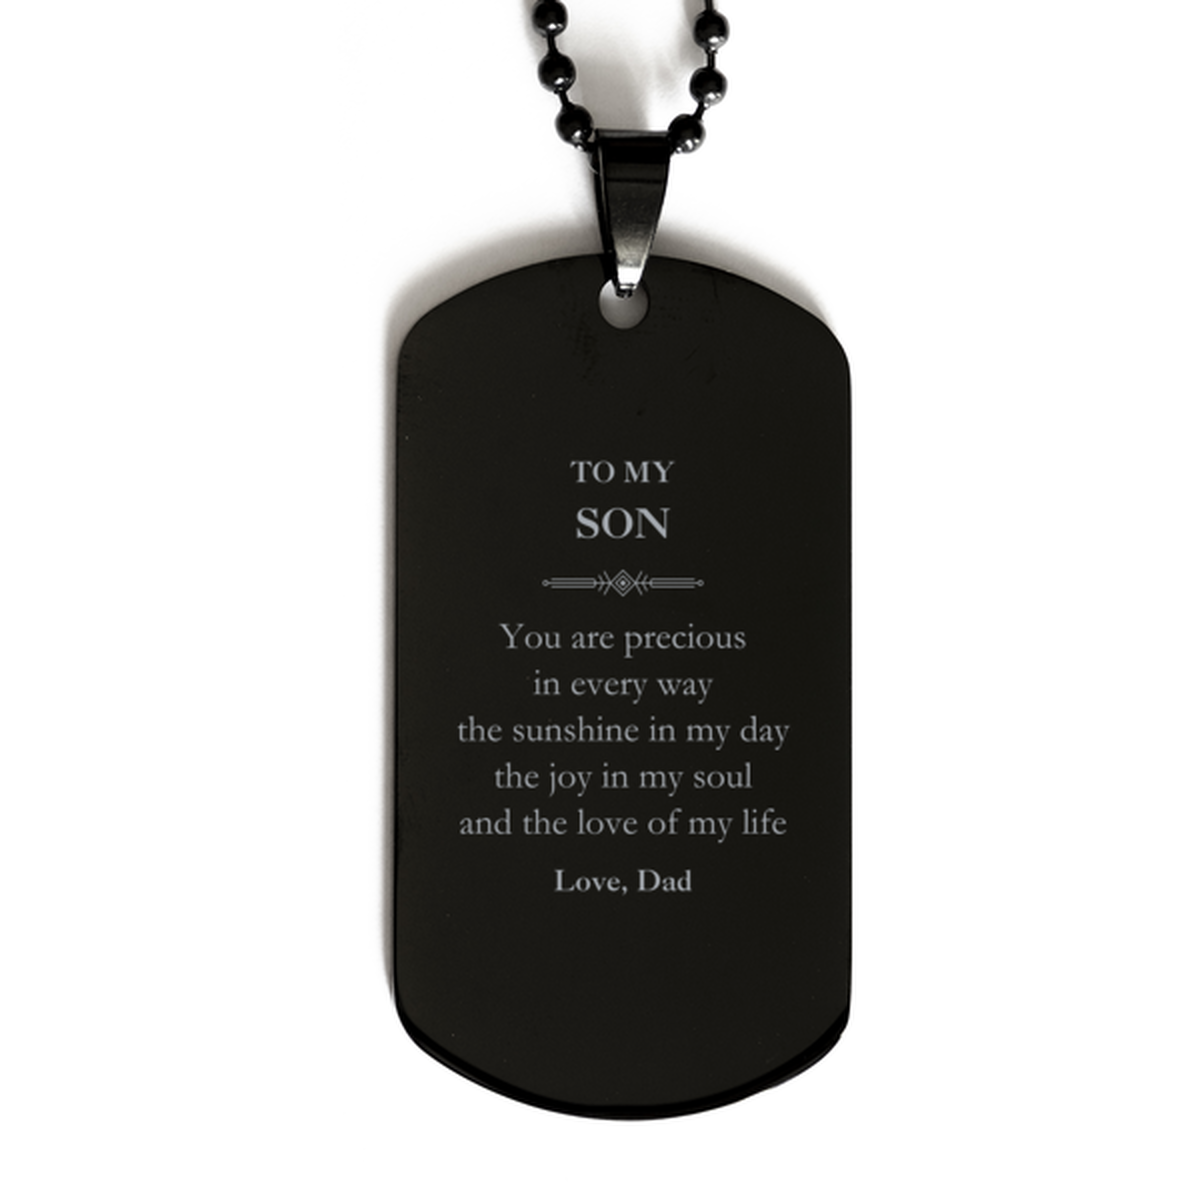 Graduation Gifts for Son Black Dog Tag Present from Dad, Christmas Son Birthday Gifts Son You are precious in every way the sunshine in my day. Love, Dad